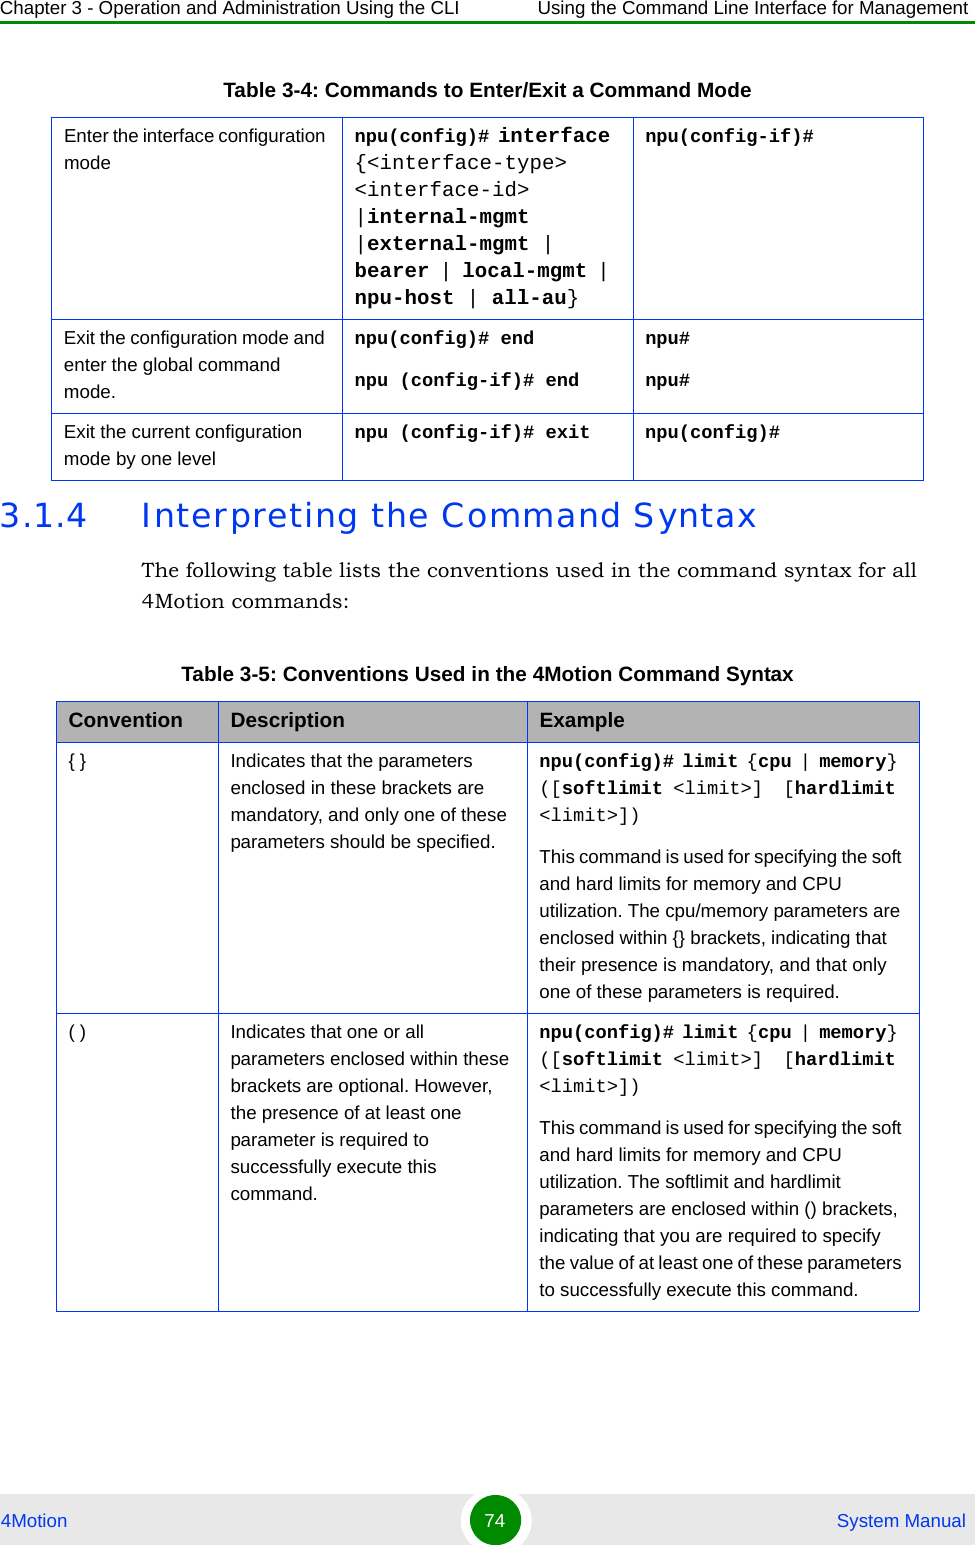 Chapter 3 - Operation and Administration Using the CLI Using the Command Line Interface for Management4Motion 74  System Manual3.1.4 Interpreting the Command SyntaxThe following table lists the conventions used in the command syntax for all 4Motion commands:Enter the interface configuration modenpu(config)# interface {&lt;interface-type&gt; &lt;interface-id&gt; |internal-mgmt |external-mgmt | bearer | local-mgmt | npu-host | all-au}npu(config-if)# Exit the configuration mode and enter the global command mode.npu(config)# endnpu (config-if)# endnpu#npu#Exit the current configuration mode by one levelnpu (config-if)# exit npu(config)#Table 3-5: Conventions Used in the 4Motion Command SyntaxConvention Description Example{ } Indicates that the parameters enclosed in these brackets are mandatory, and only one of these parameters should be specified.npu(config)# limit { cpu | memory} ([softlimit &lt;limit&gt;]  [hardlimit &lt;limit&gt;])This command is used for specifying the soft and hard limits for memory and CPU utilization. The cpu/memory parameters are enclosed within {} brackets, indicating that their presence is mandatory, and that only one of these parameters is required. ( ) Indicates that one or all parameters enclosed within these brackets are optional. However, the presence of at least one parameter is required to successfully execute this command.npu(config)# limit { cpu | memory} ([softlimit &lt;limit&gt;]  [hardlimit &lt;limit&gt;])This command is used for specifying the soft and hard limits for memory and CPU utilization. The softlimit and hardlimit parameters are enclosed within () brackets, indicating that you are required to specify the value of at least one of these parameters to successfully execute this command.Table 3-4: Commands to Enter/Exit a Command Mode